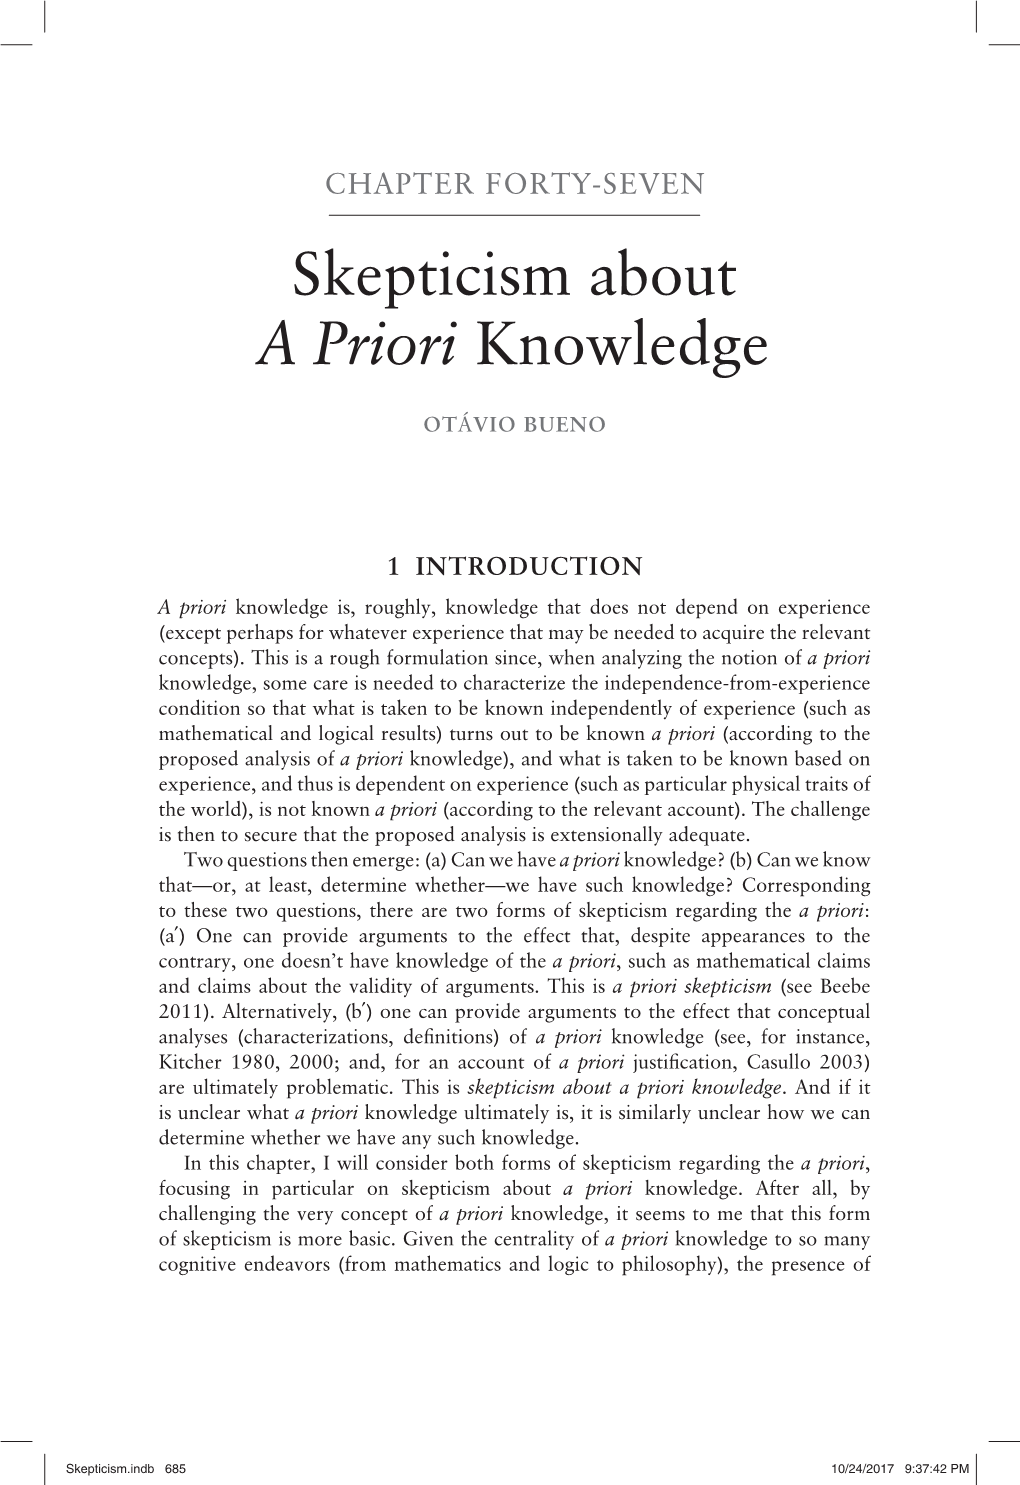 Skepticism About a Priori Knowledge